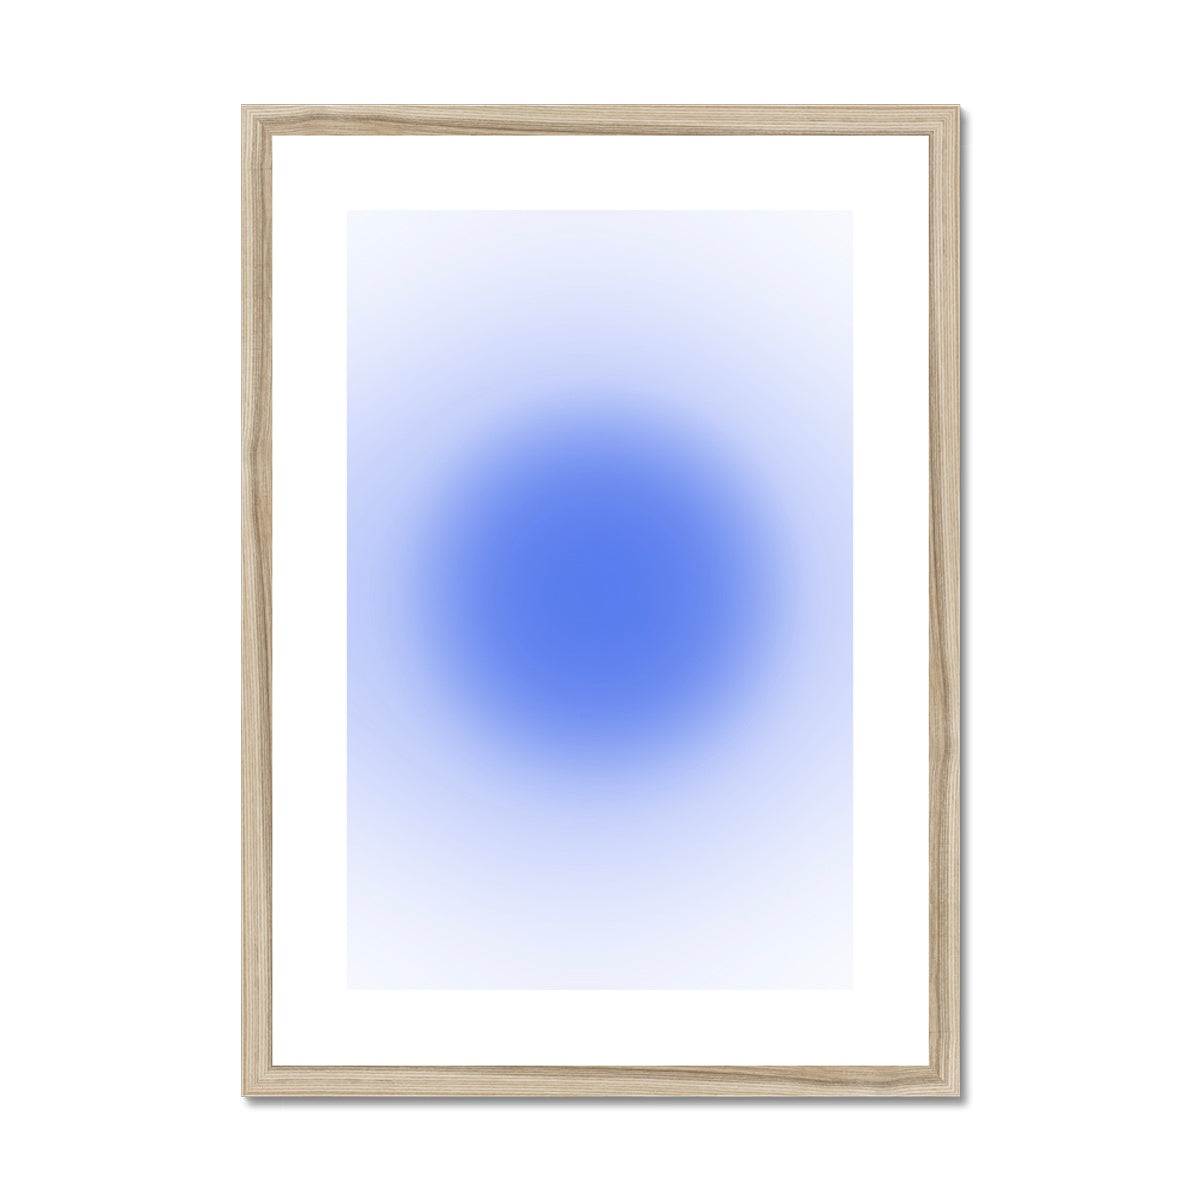 Simple gradient aura wall art prints featuring minimalist pastel Our vibrant aura gradient posters have an endless array of color options perfect for aesthetic dorm and apartment decor.